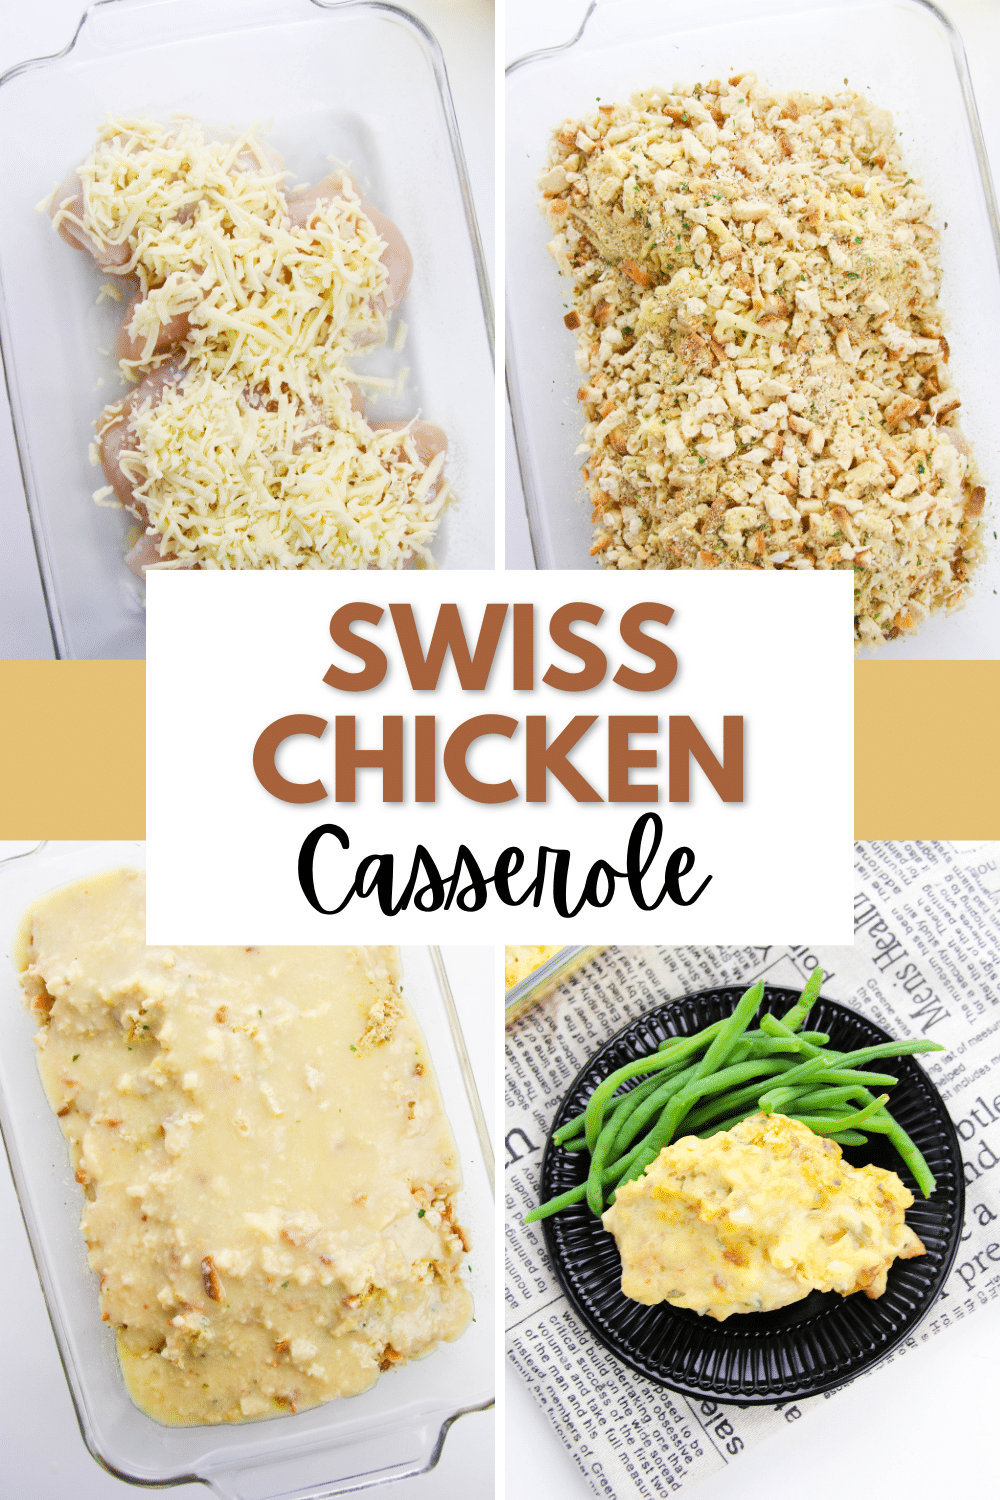 Swiss chicken casserole is an easy, yet incredibly satisfying dish featuring melted Swiss cheese, juicy chicken, and savory stuffing. #swisschickencasserole #swisscheese #casserolerecipe #creamyswisschickenbake #stuffingcasserole via @wondermomwannab